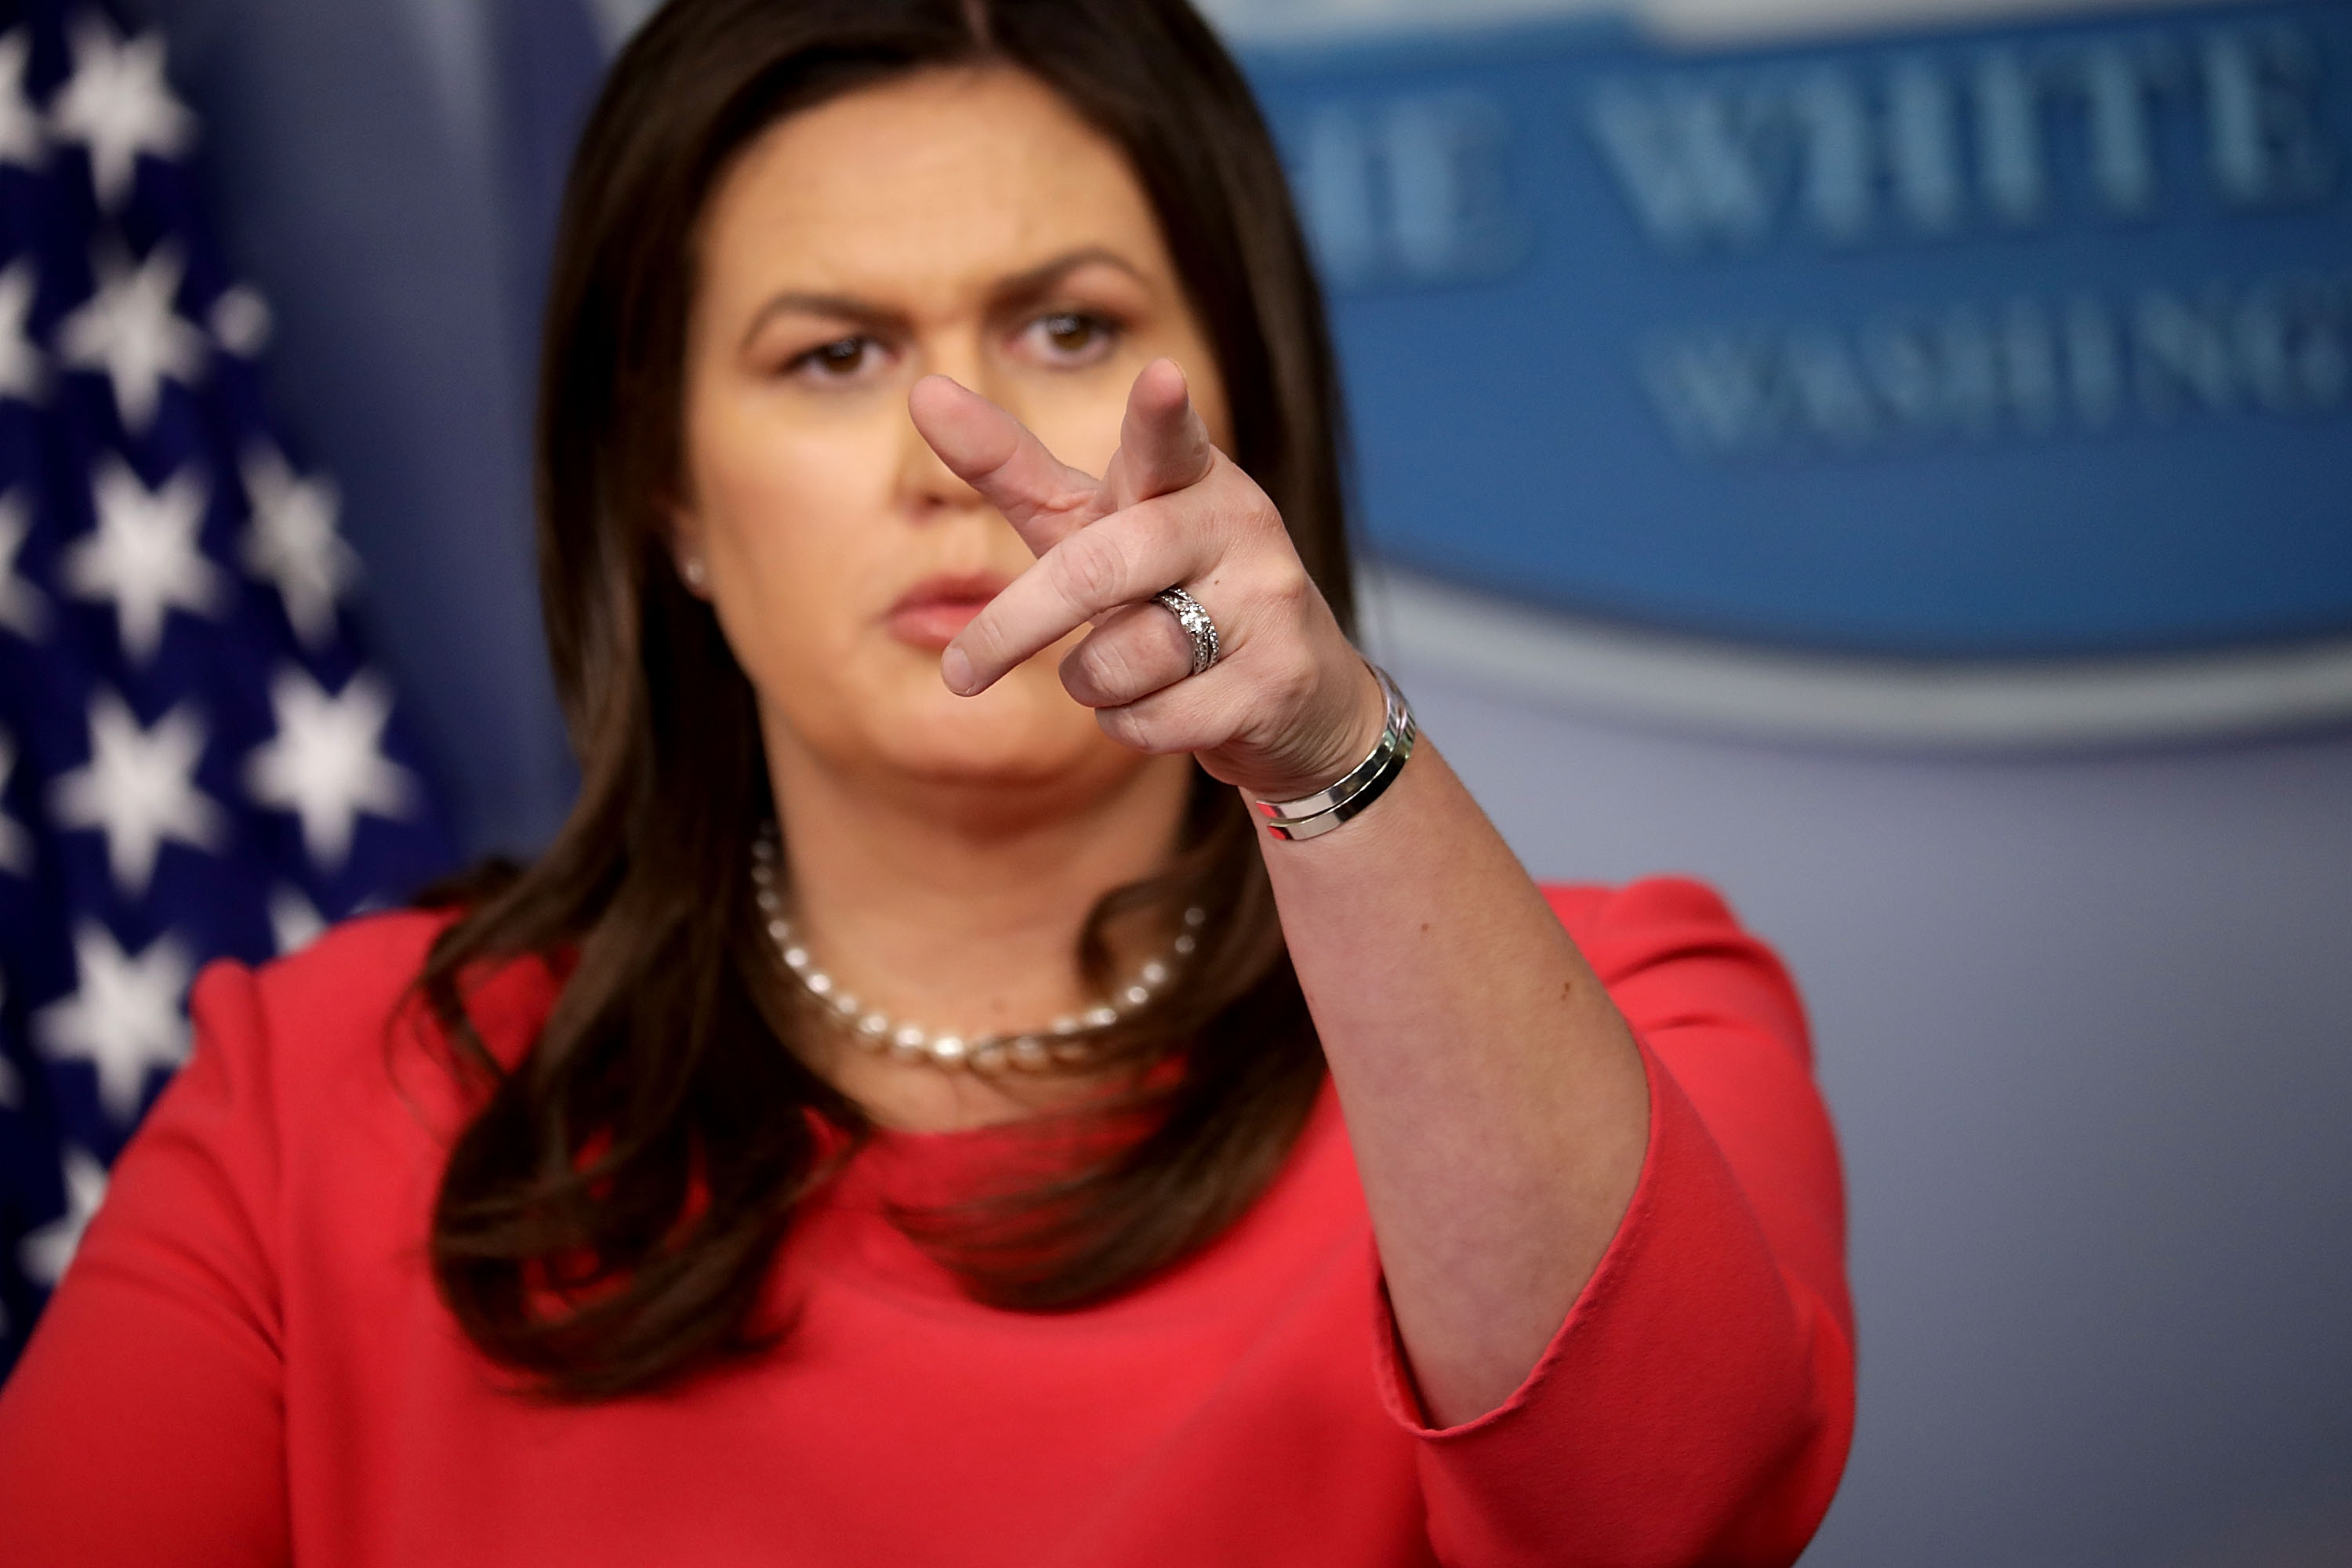 WASHINGTON, DC - JULY 18: White House Press Secretary Sarah Huckabee Sanders calls on reporters during a news conference in the Brady Press Briefing Room at the White House July 18, 2018 in Washington, DC. During the press conference Sanders said that Russian meddling didn't happen under President Donald Trump's watch but under the Obama administration. (Photo by Chip Somodevilla/Getty Images)